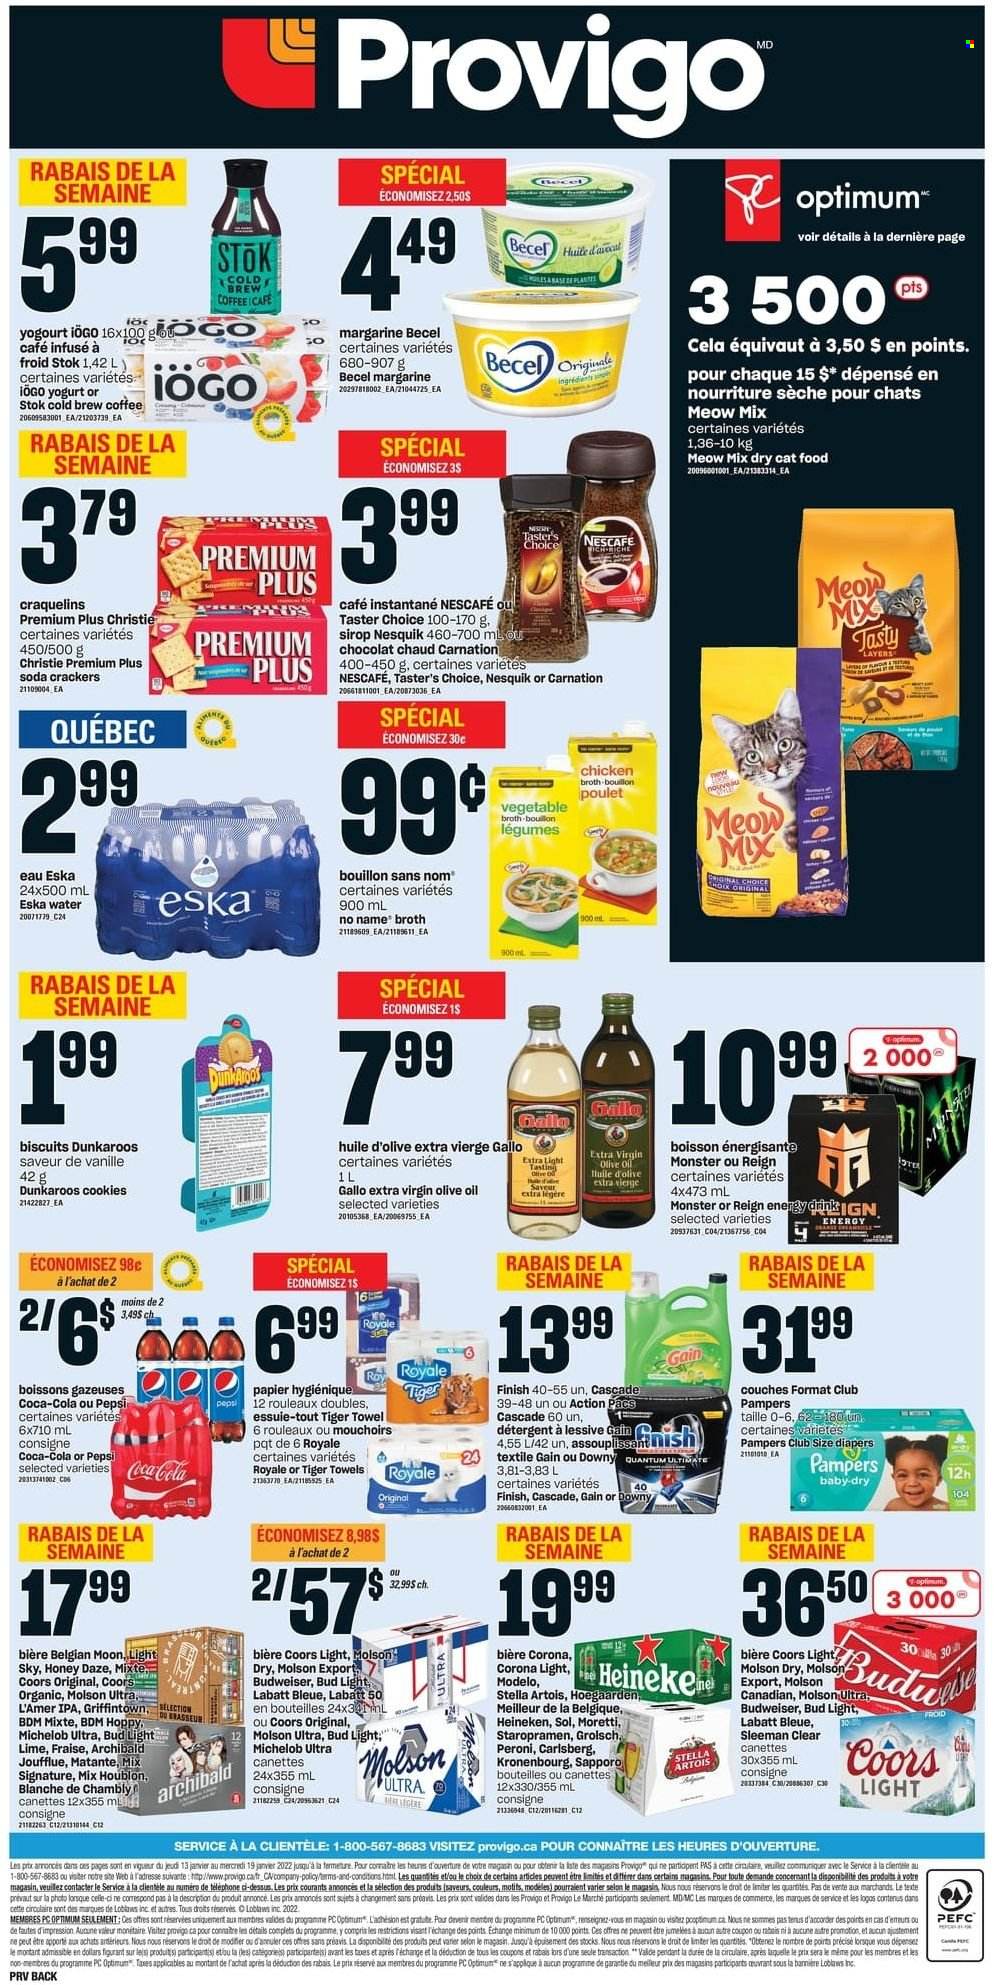 thumbnail - Provigo Flyer - January 13, 2022 - January 19, 2022 - Sales products - No Name, yoghurt, margarine, cookies, crackers, biscuit, bouillon, chicken broth, broth, extra virgin olive oil, olive oil, oil, honey, Coca-Cola, Pepsi, energy drink, Monster, soda, coffee, beer, Bud Light, Corona Extra, Heineken, Carlsberg, Peroni, Sol, Grolsch, IPA, Modelo, nappies, Gain, Cascade, Downy Laundry, Nesquik, Budweiser, detergent, Stella Artois, Pampers, Nescafé, Coors, Michelob. Page 2.